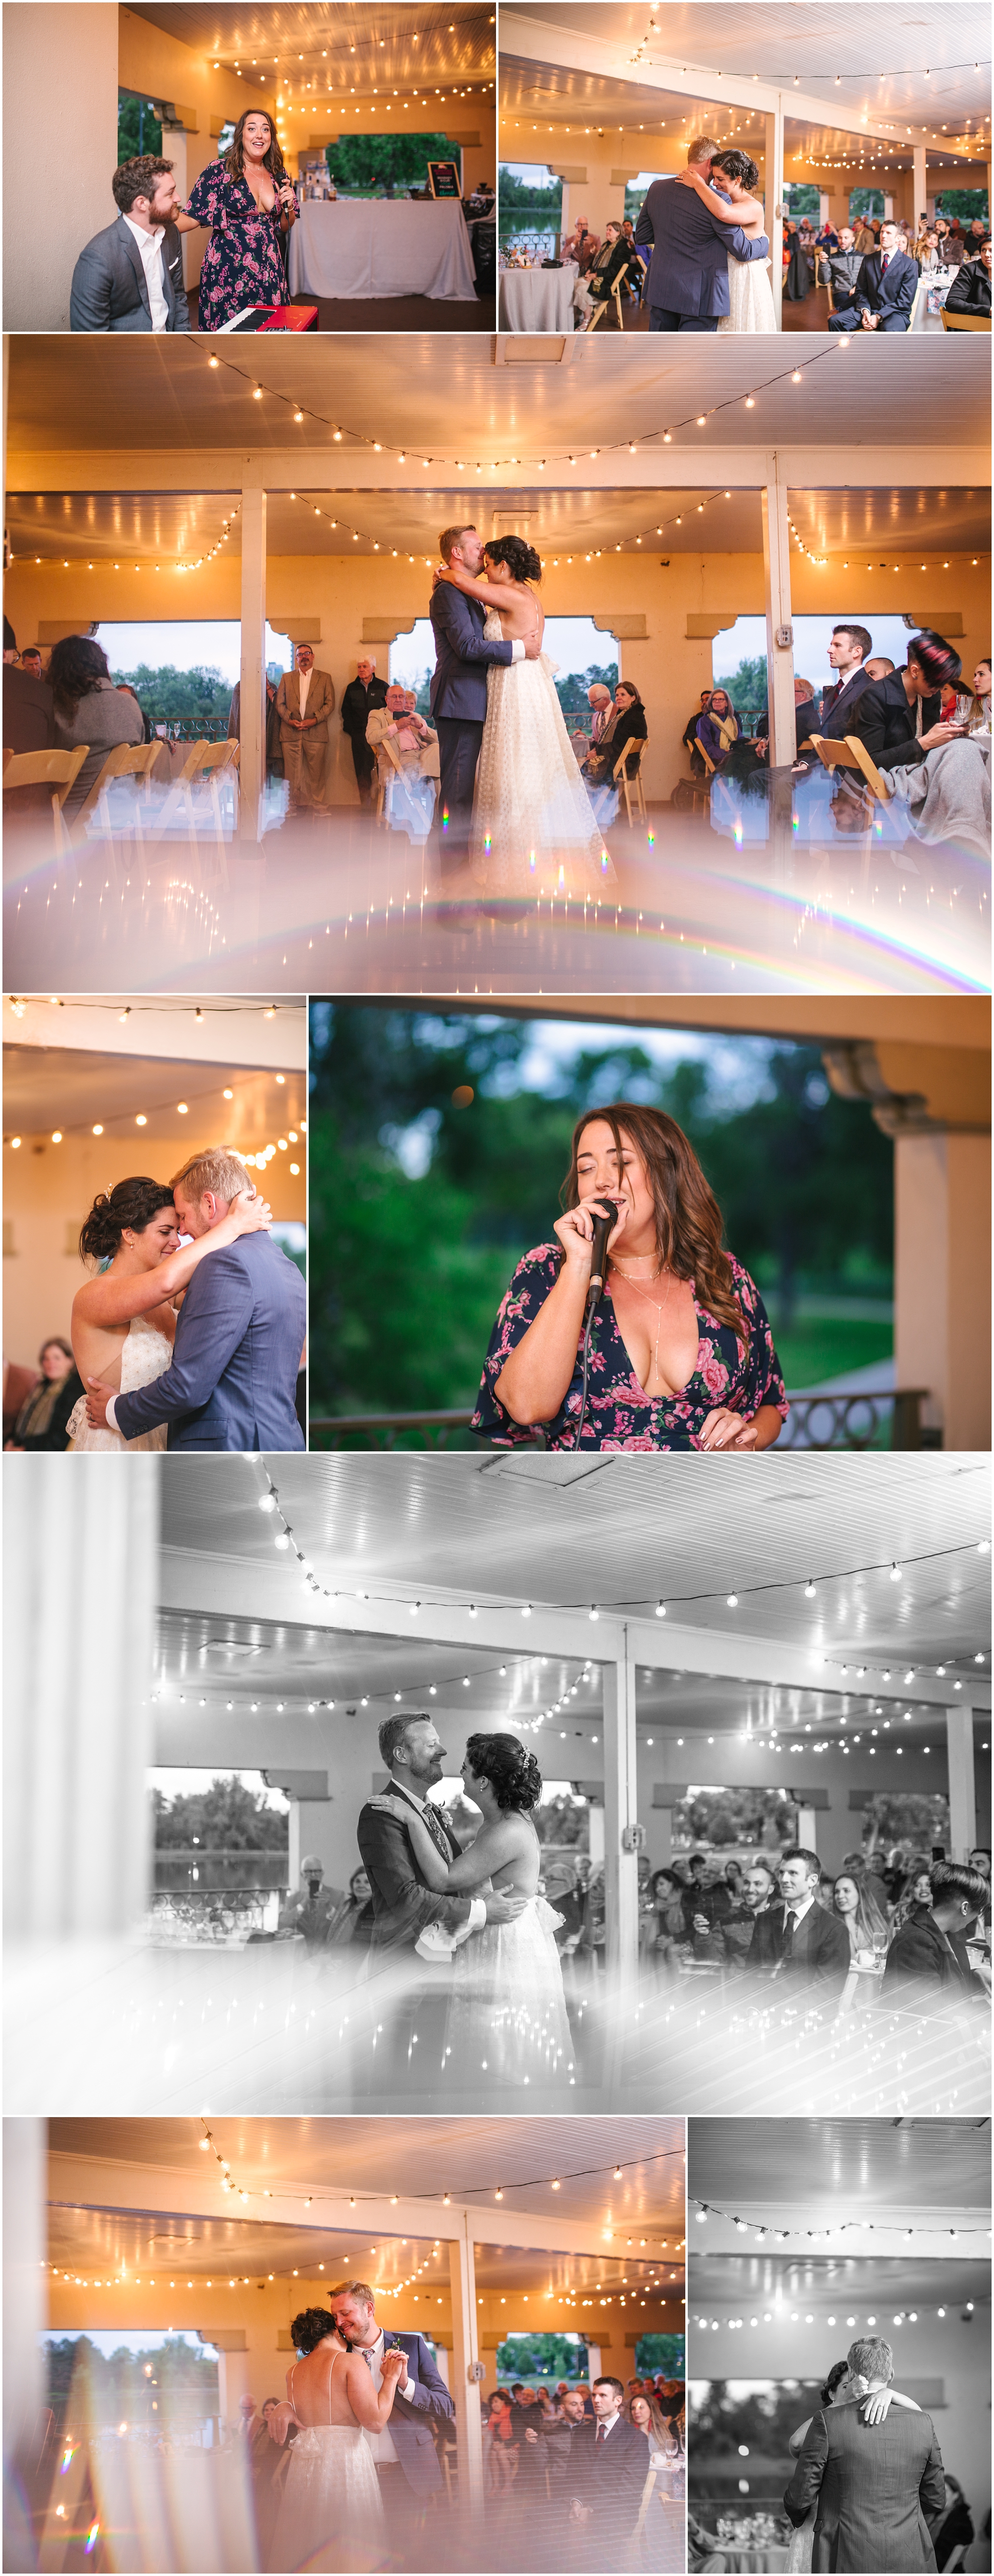 Bride and groom's first dance at Washington Park Boathouse wedding in Denver Colorado